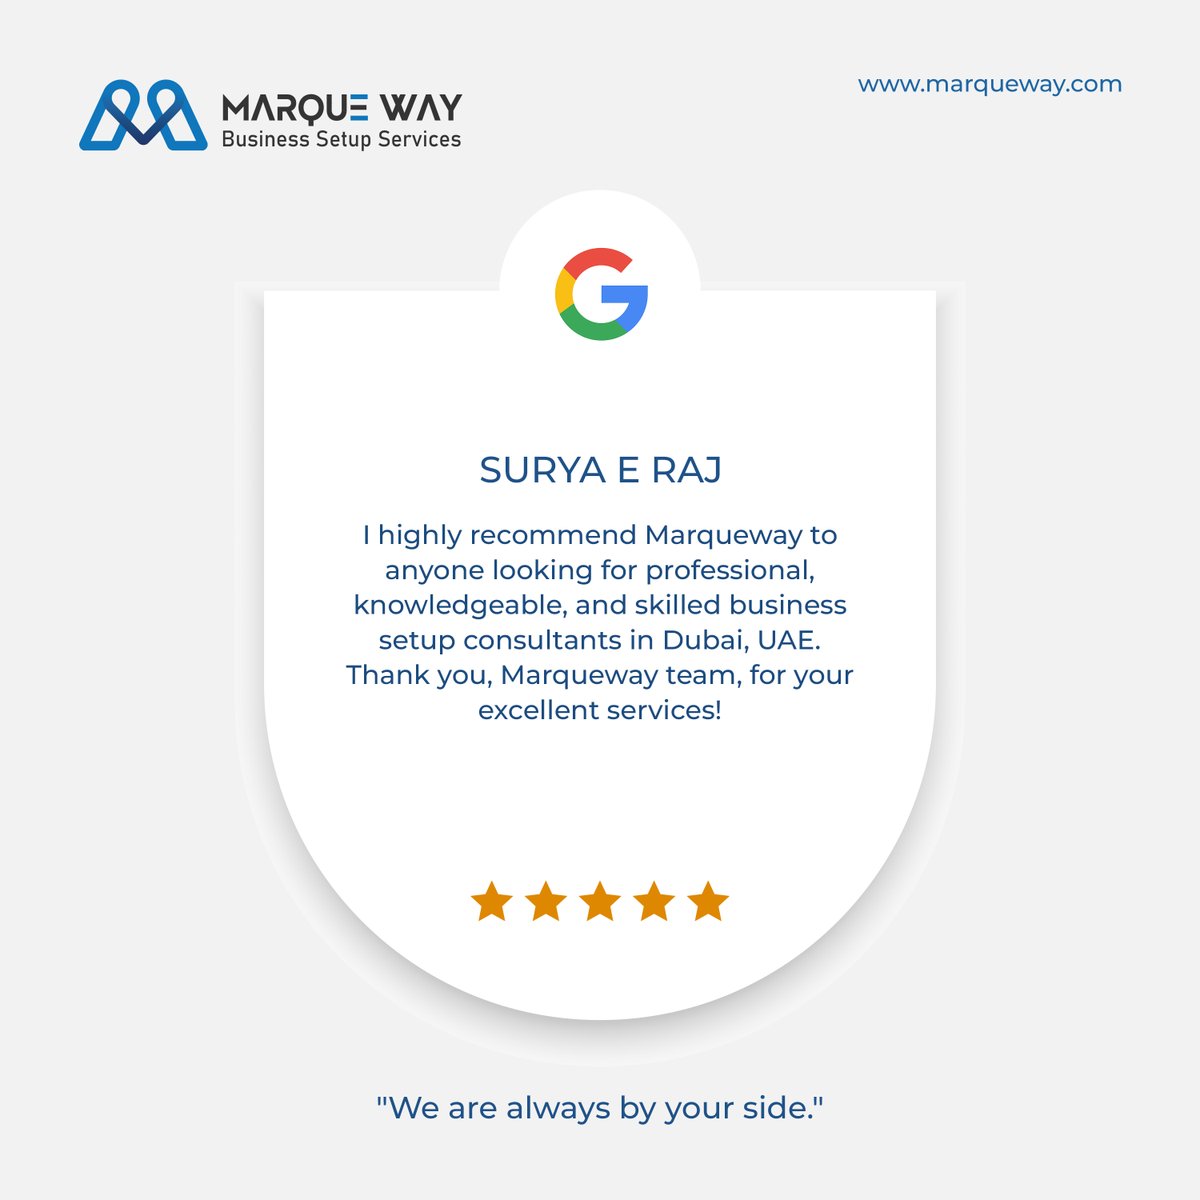 Thank you Mrs. Surya for your kind words. We will do our best to keep on delivering top-notch business setup services in Dubai.

#Marqueway #review #customerfeedback #customerservice #happyclients #googlereview #positivewords #response #happycustomer #companyformationuae